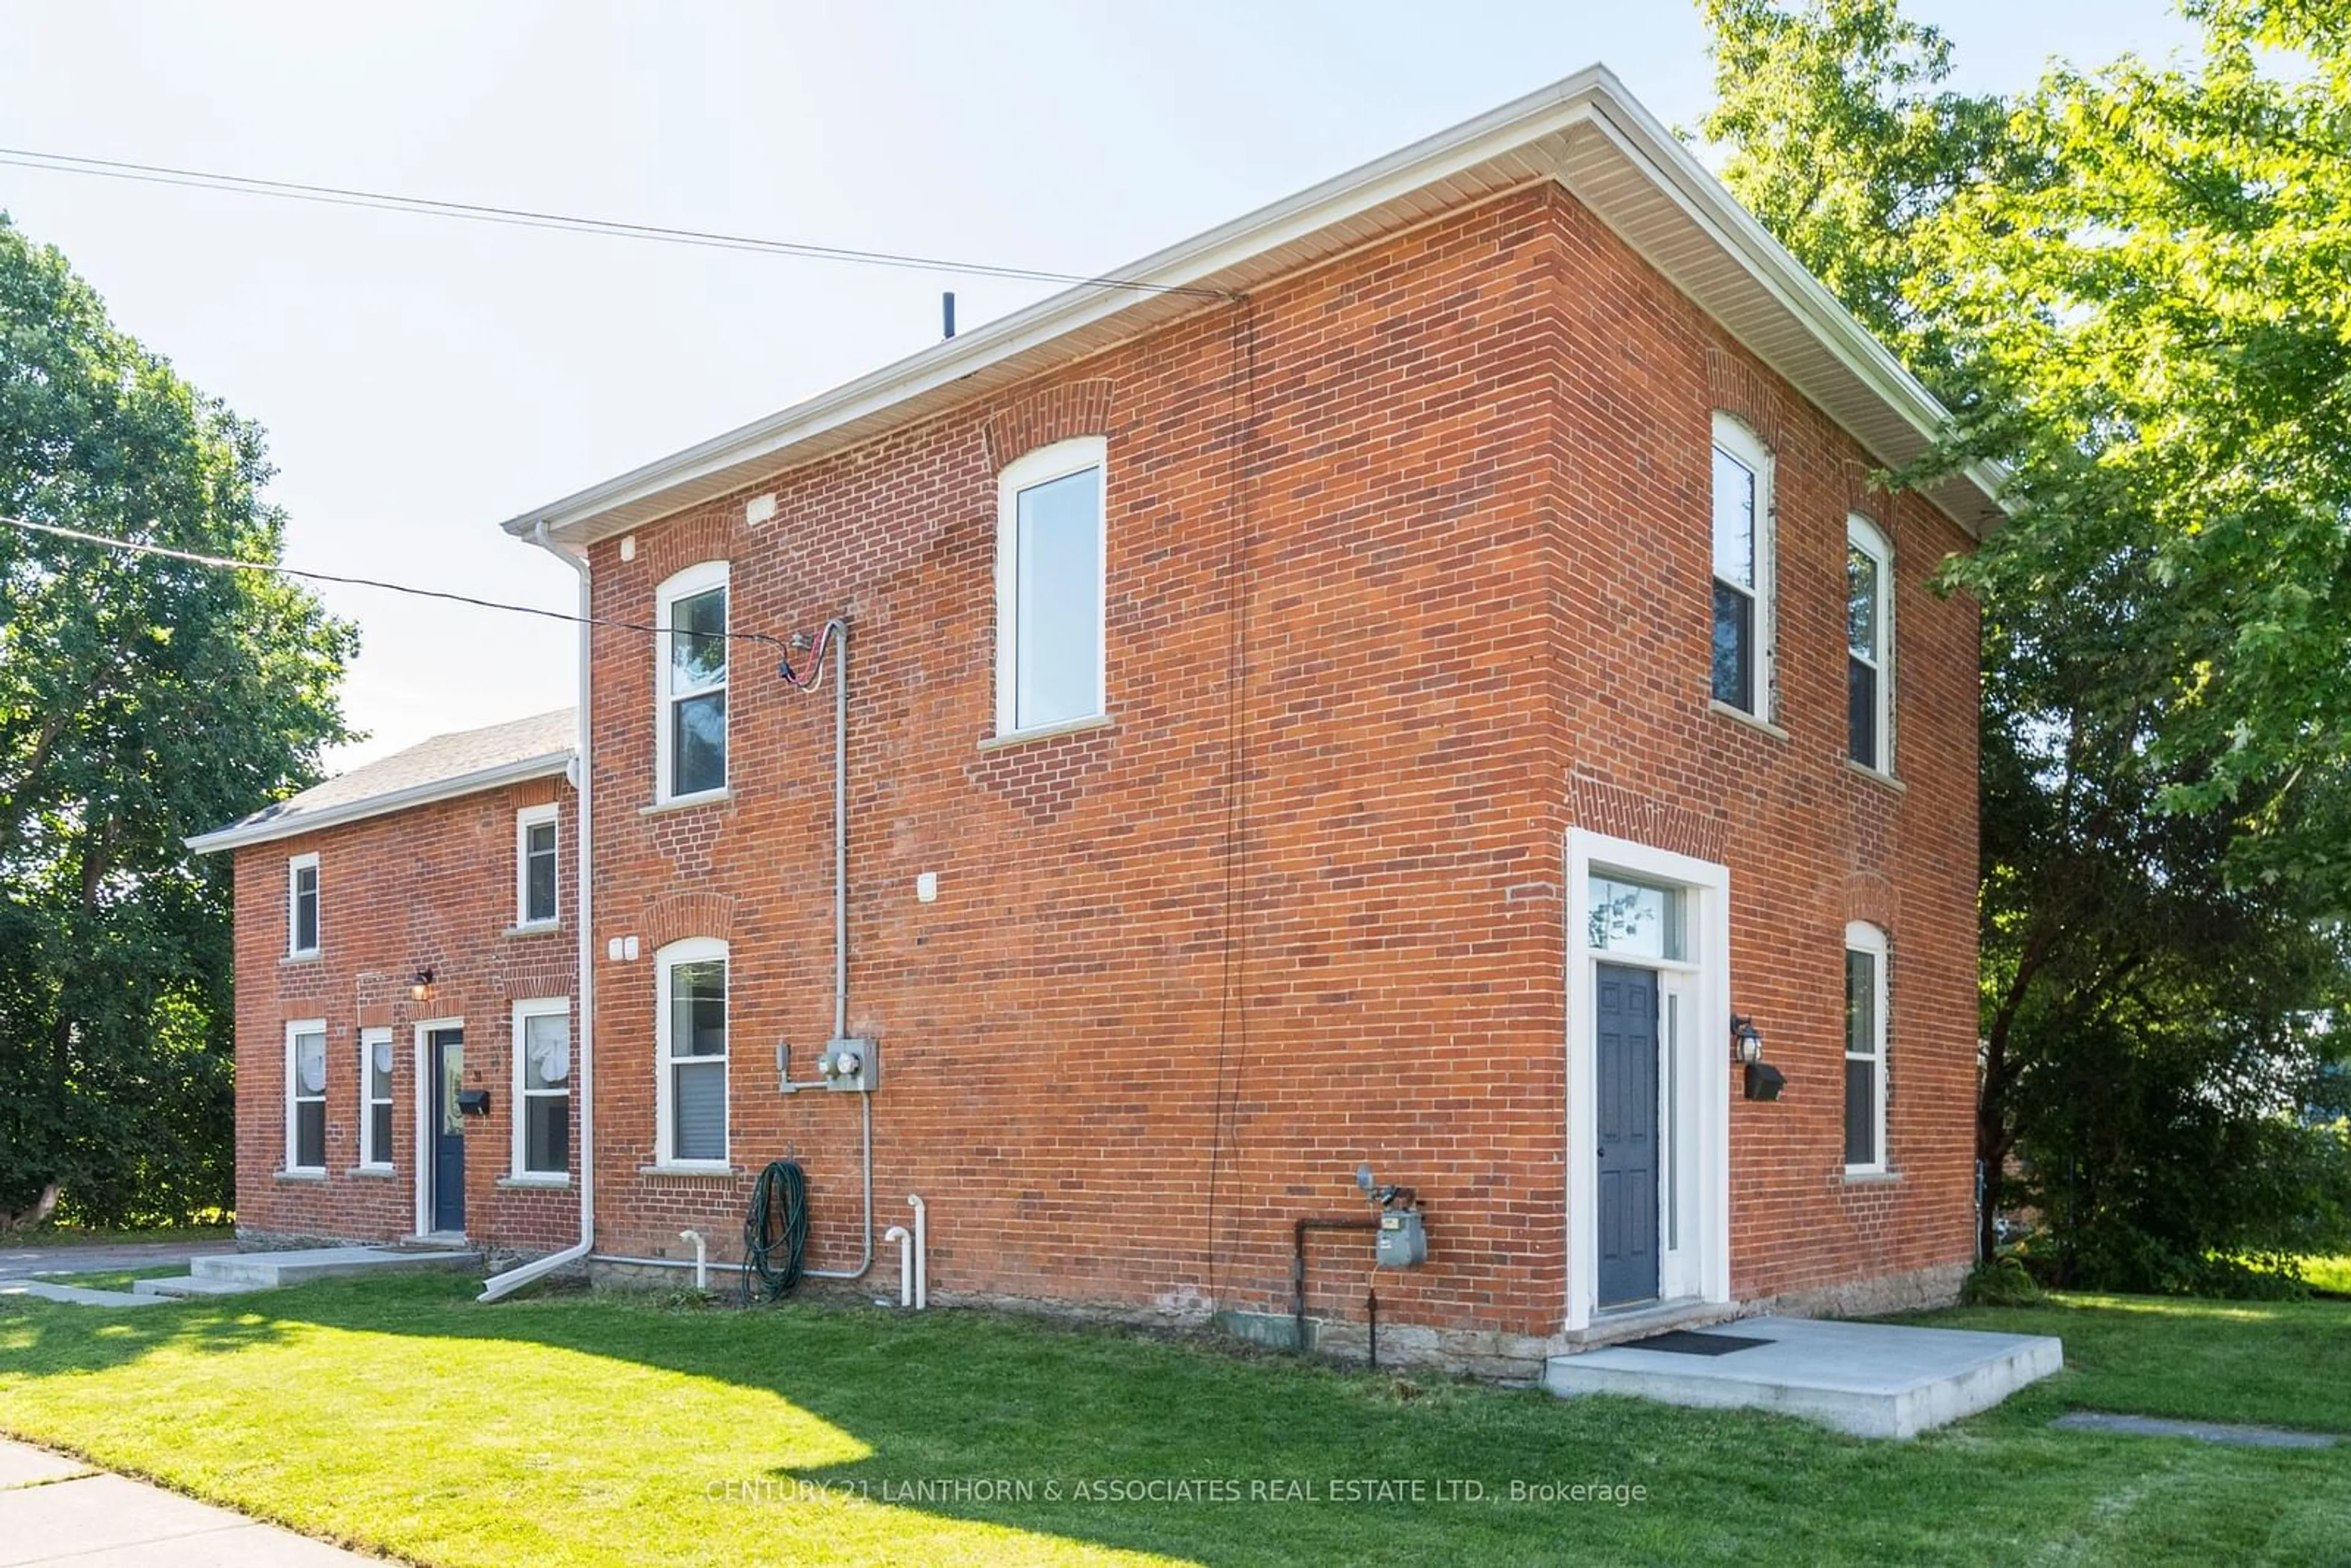 Home with brick exterior material for 31 Bettes St, Belleville Ontario K8N 3W5